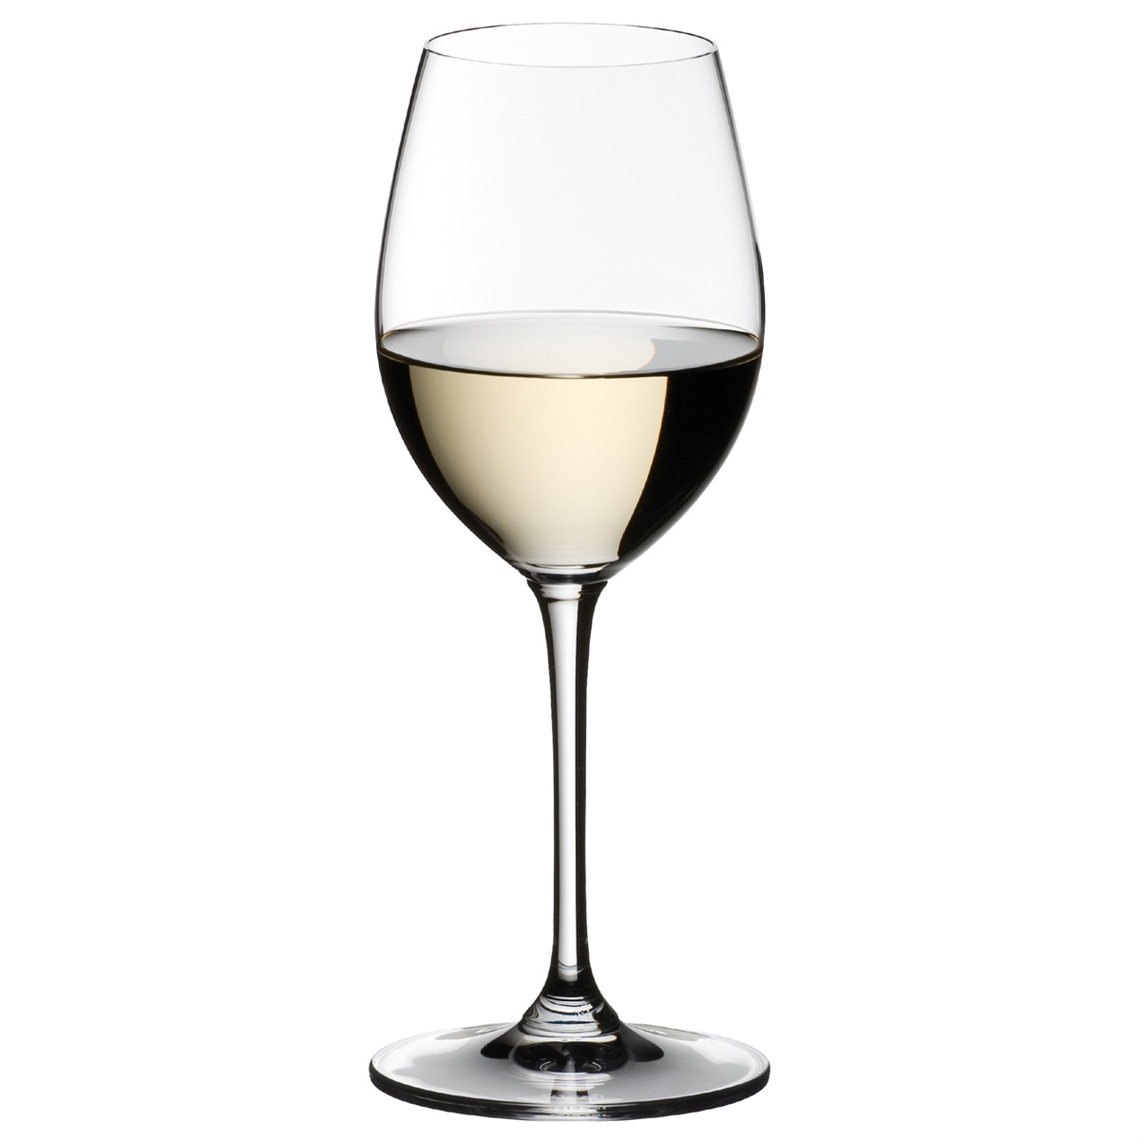 View more mondial from our Dessert Wine Glasses range